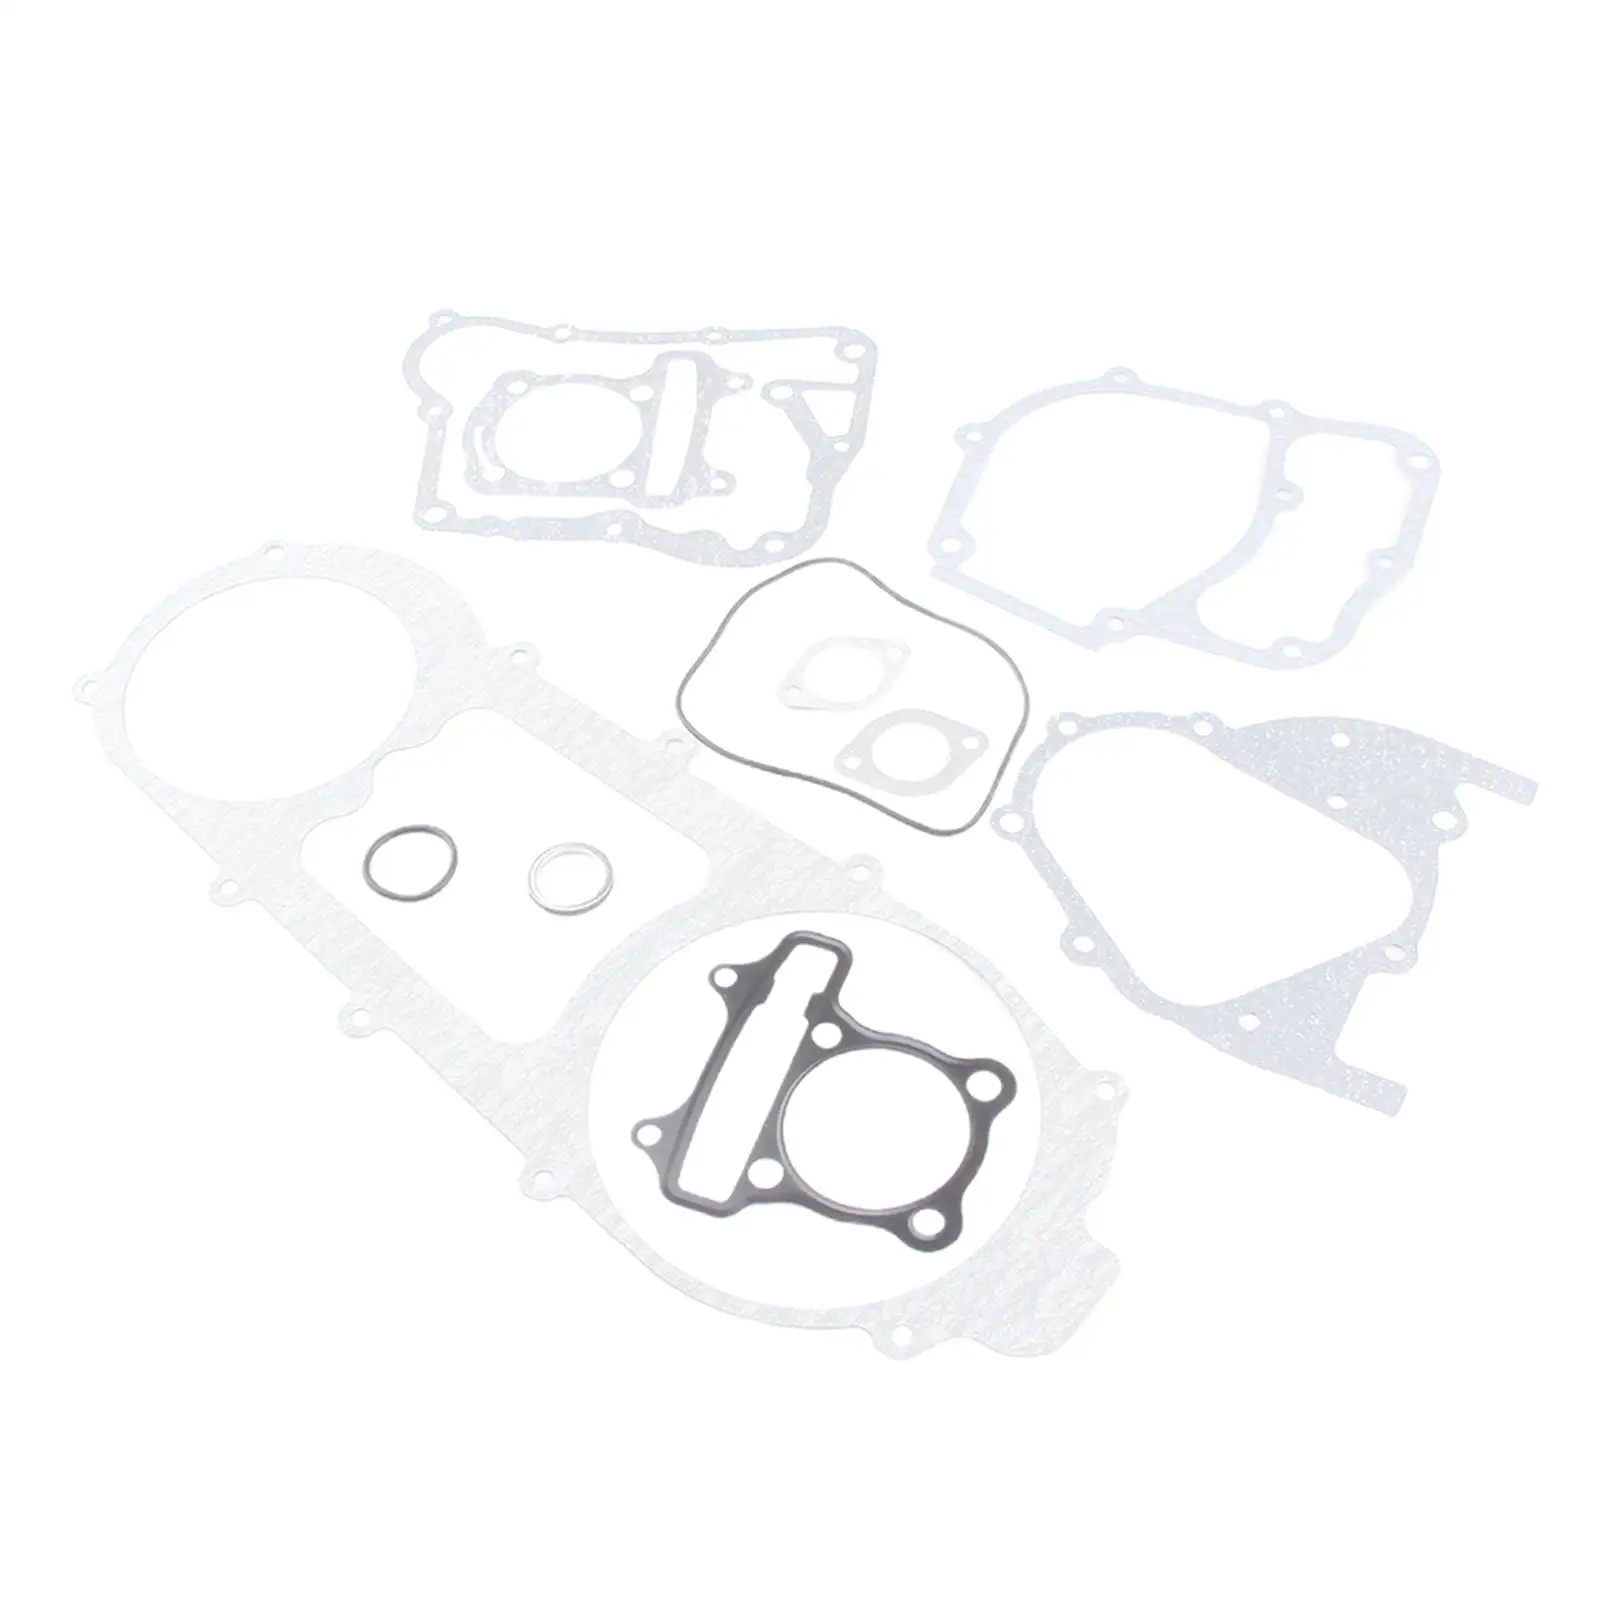 Complete Long Case Engine Head Gasket Set Kit for GY6 150cc Moped Scooters ATVs Go Karts QuadEasy to install.